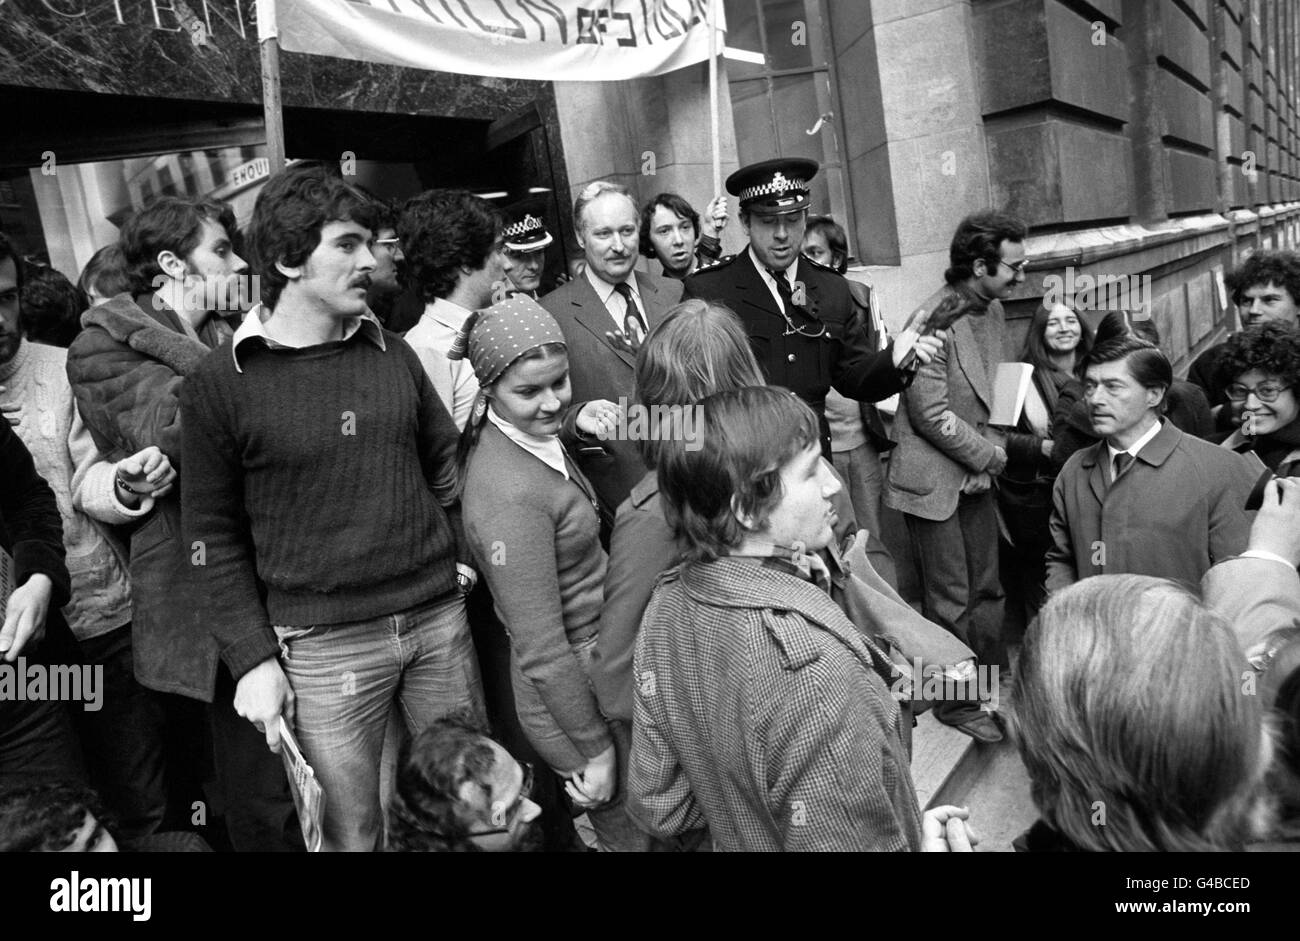 Michael Harris, under-sherriff for the City of London, surrounded by students as he leaves the London School of Economics after an unsuccessful attempt to serve an eviction order granted by a High Court judge against the students who have occupied part of the building in a sit-in as a protest against government plans to raise tuition fees. Stock Photo